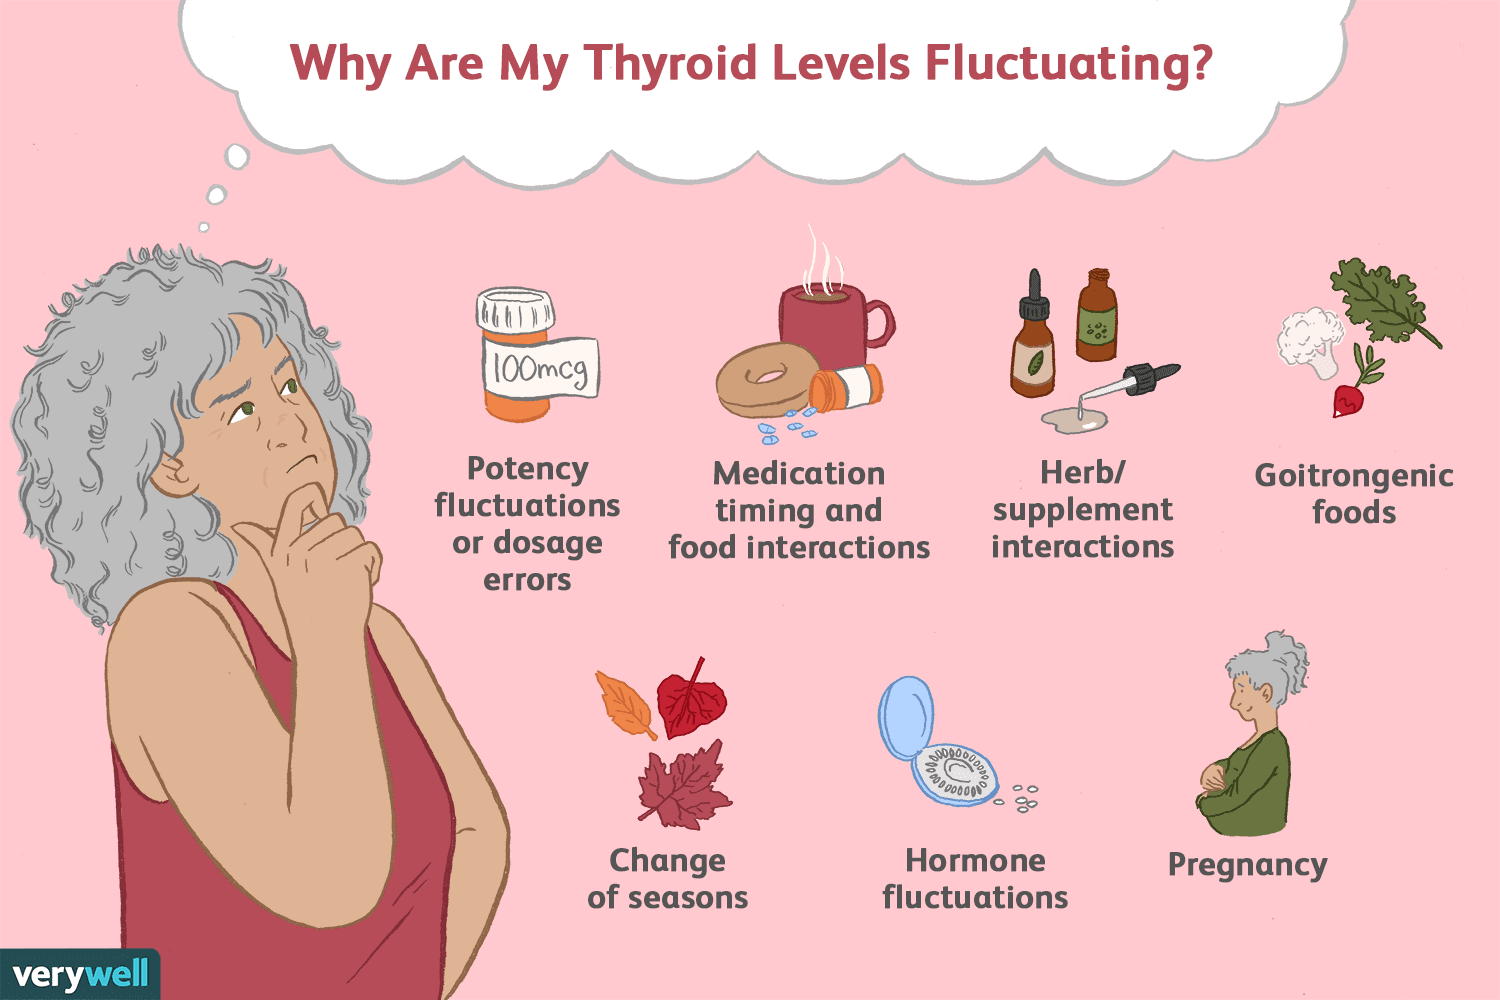 Why Your Thyroid Hormone Levels May Be Fluctuating